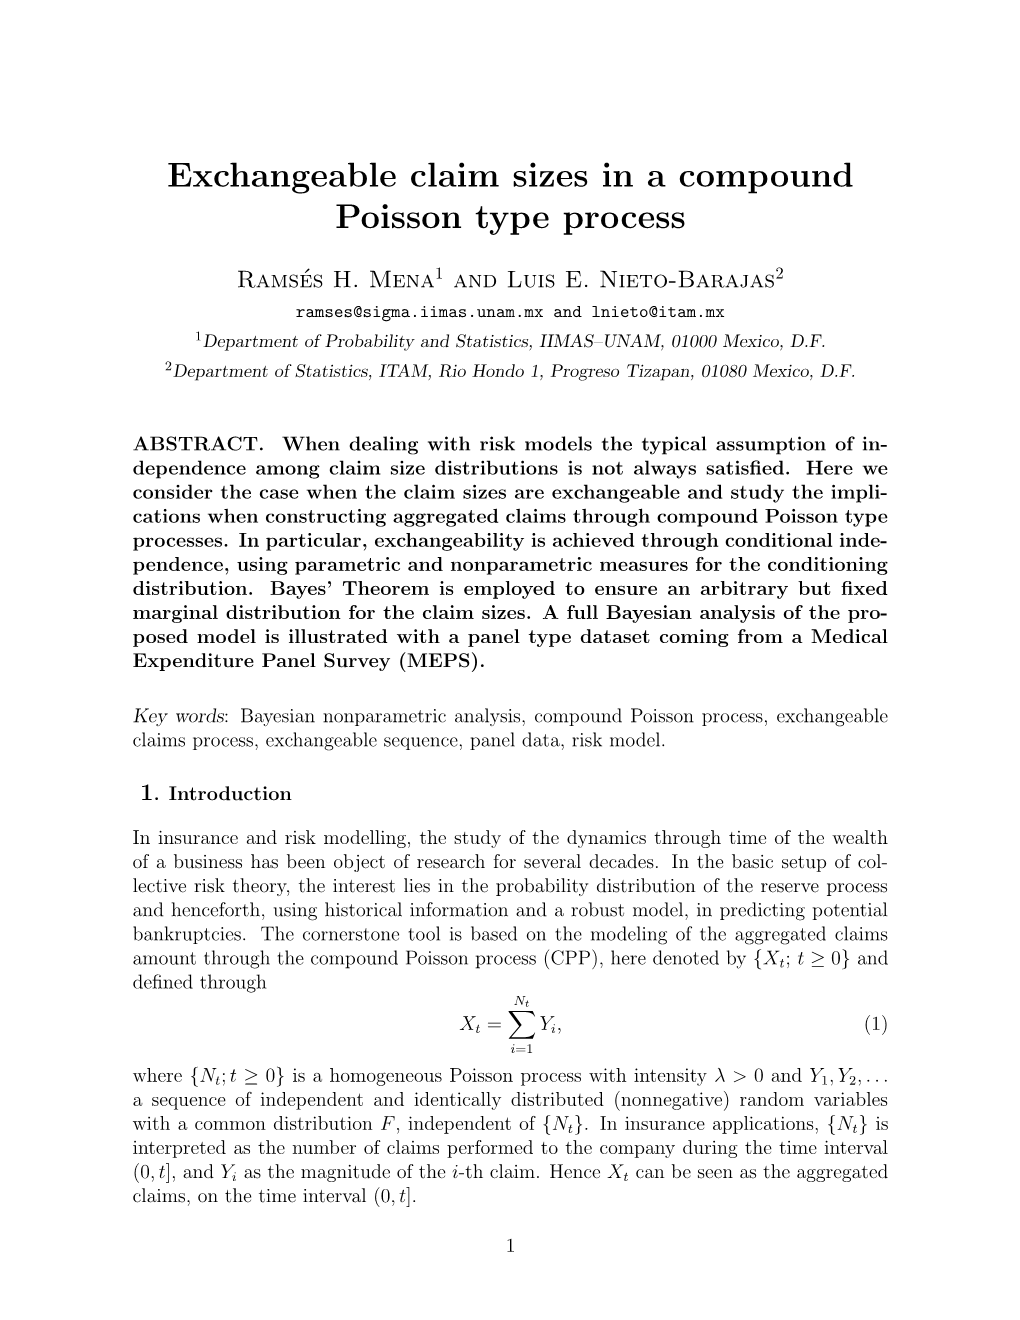 Exchangeable Claim Sizes in a Compound Poisson Type Process